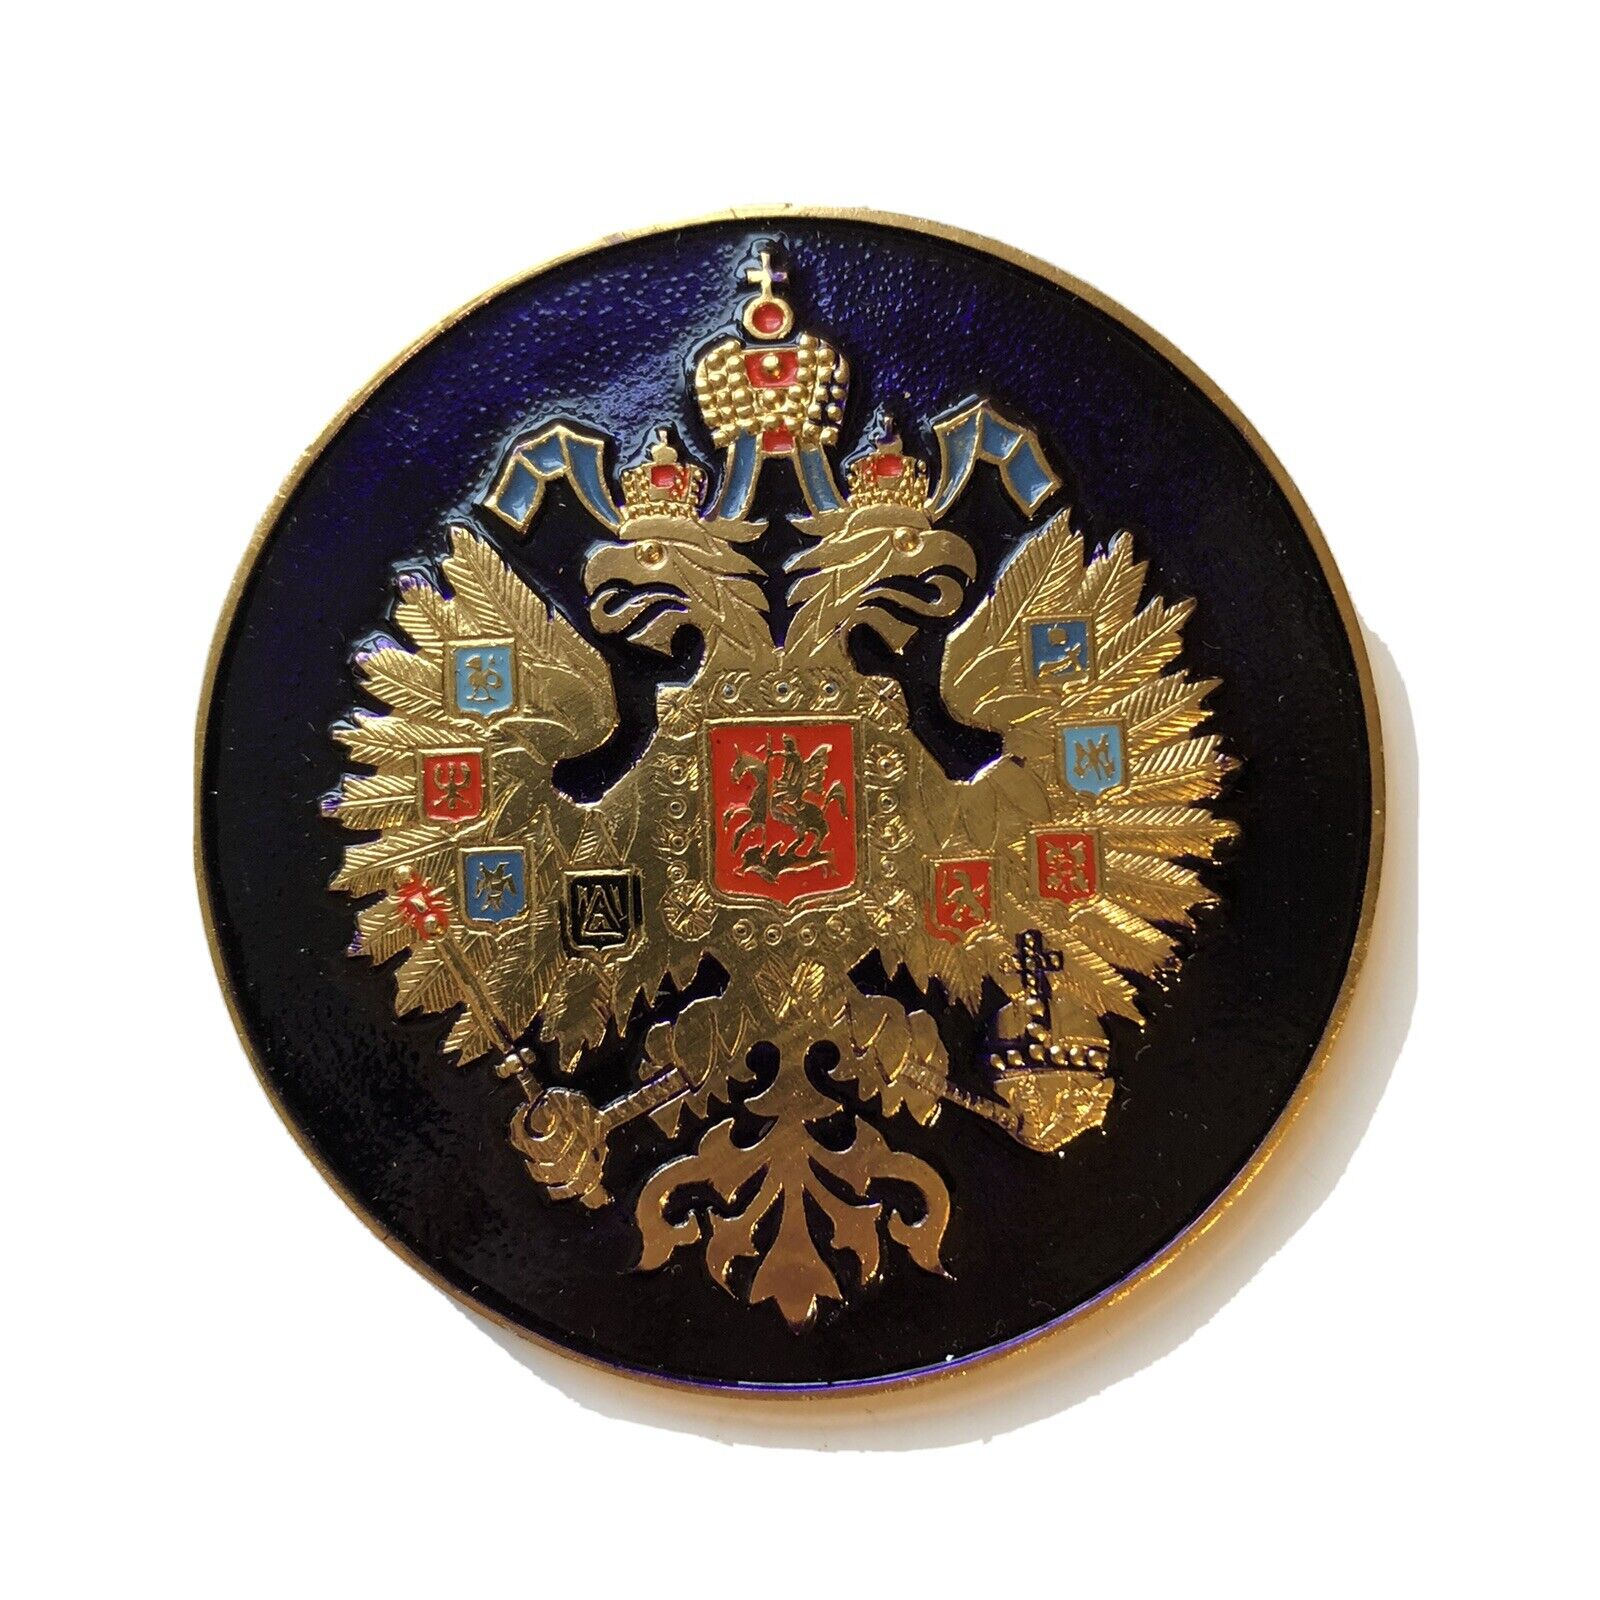 RUSSIAN IMPERIAL EAGLE. RUSSIA COAT OF ARMS CREST BADGE